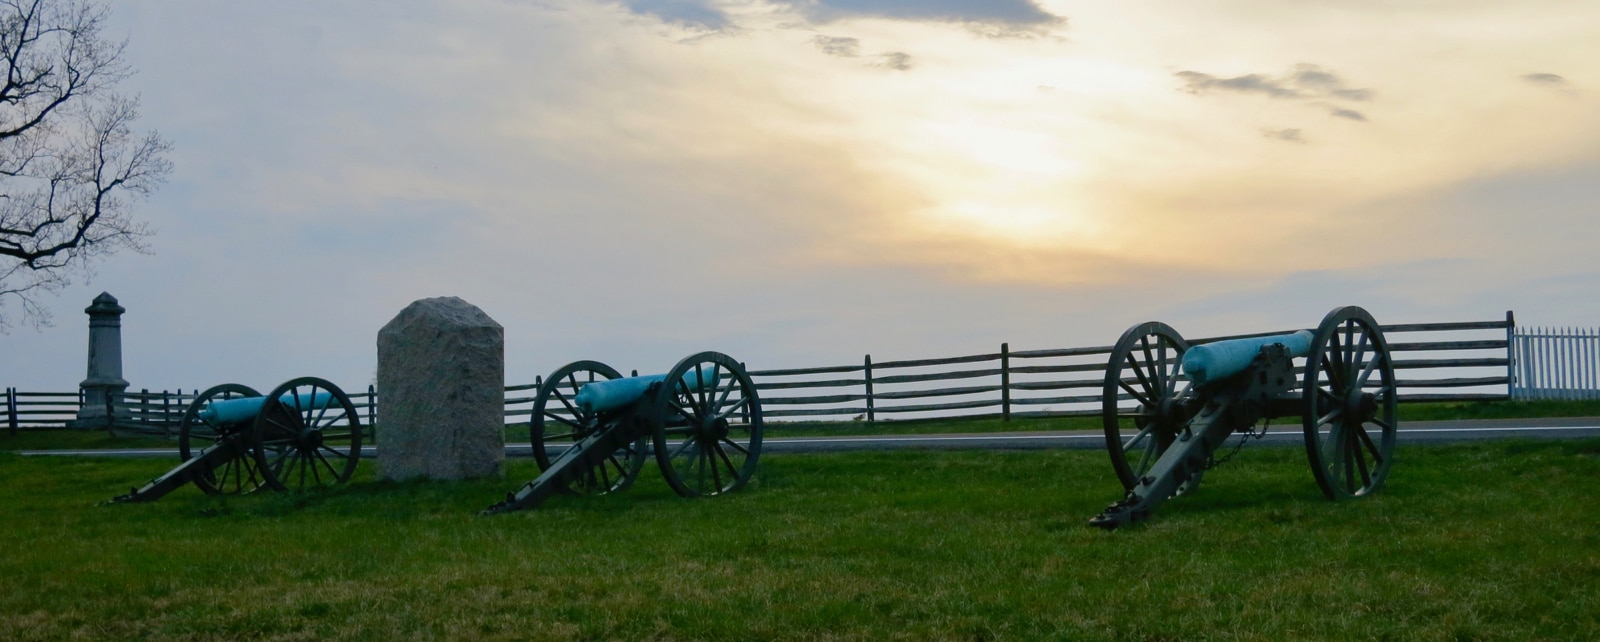 8 Dramatic Things To Do in Gettysburg PA Historical Sites